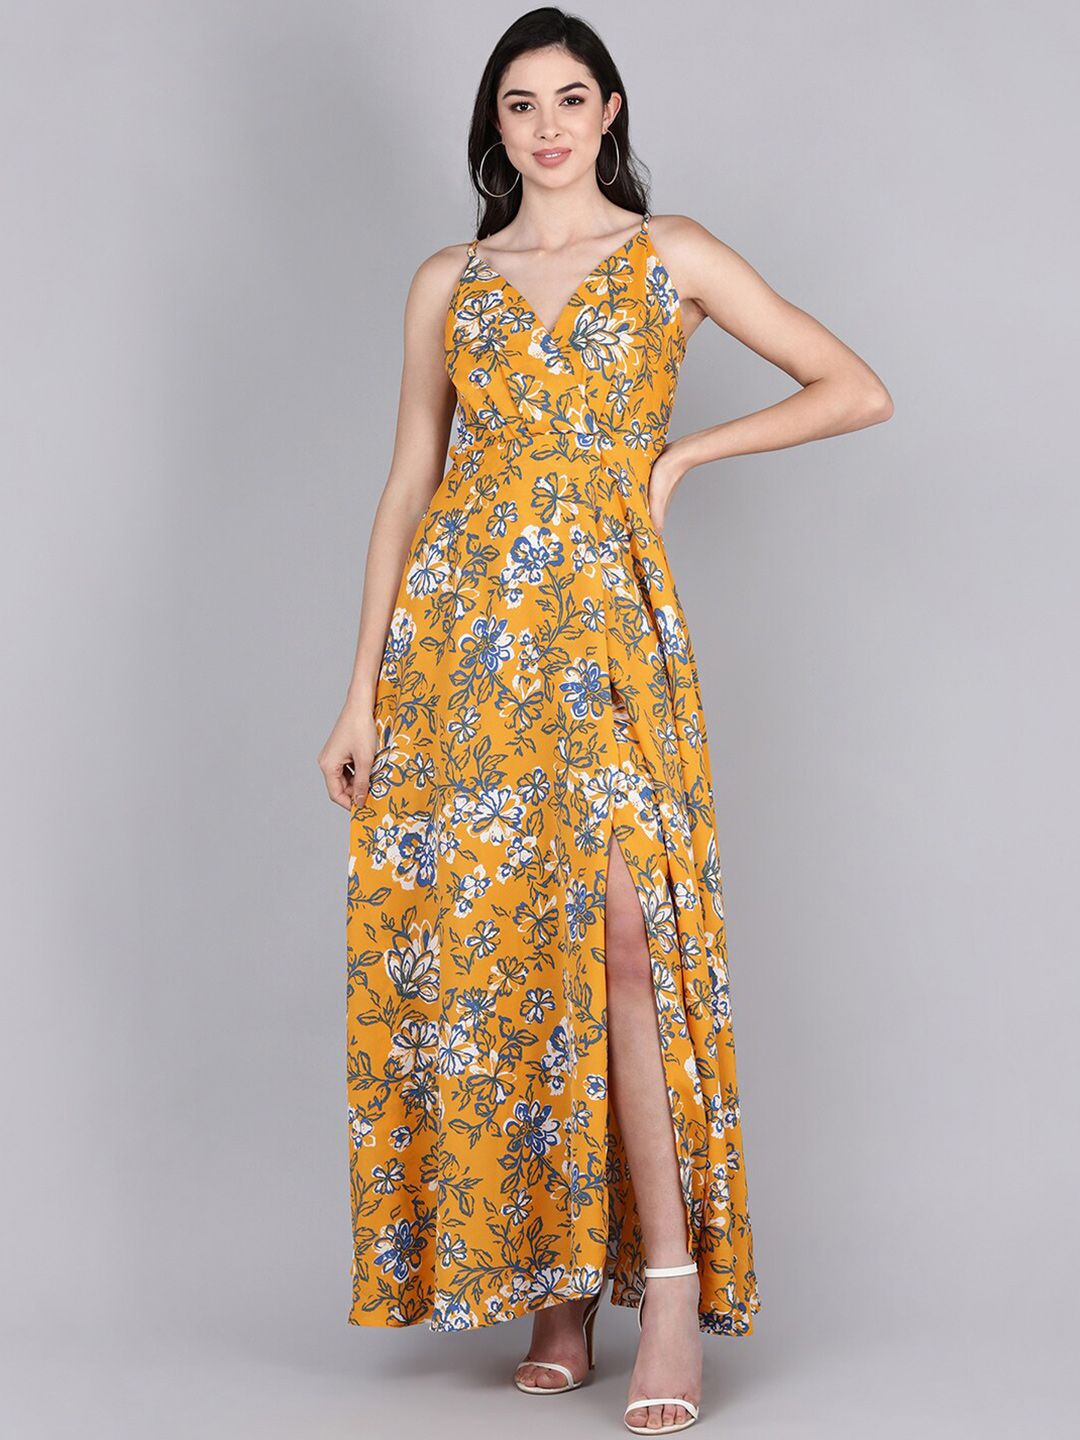 AHIKA Mustard Yellow & Blue Floral Maxi Dress Price in India